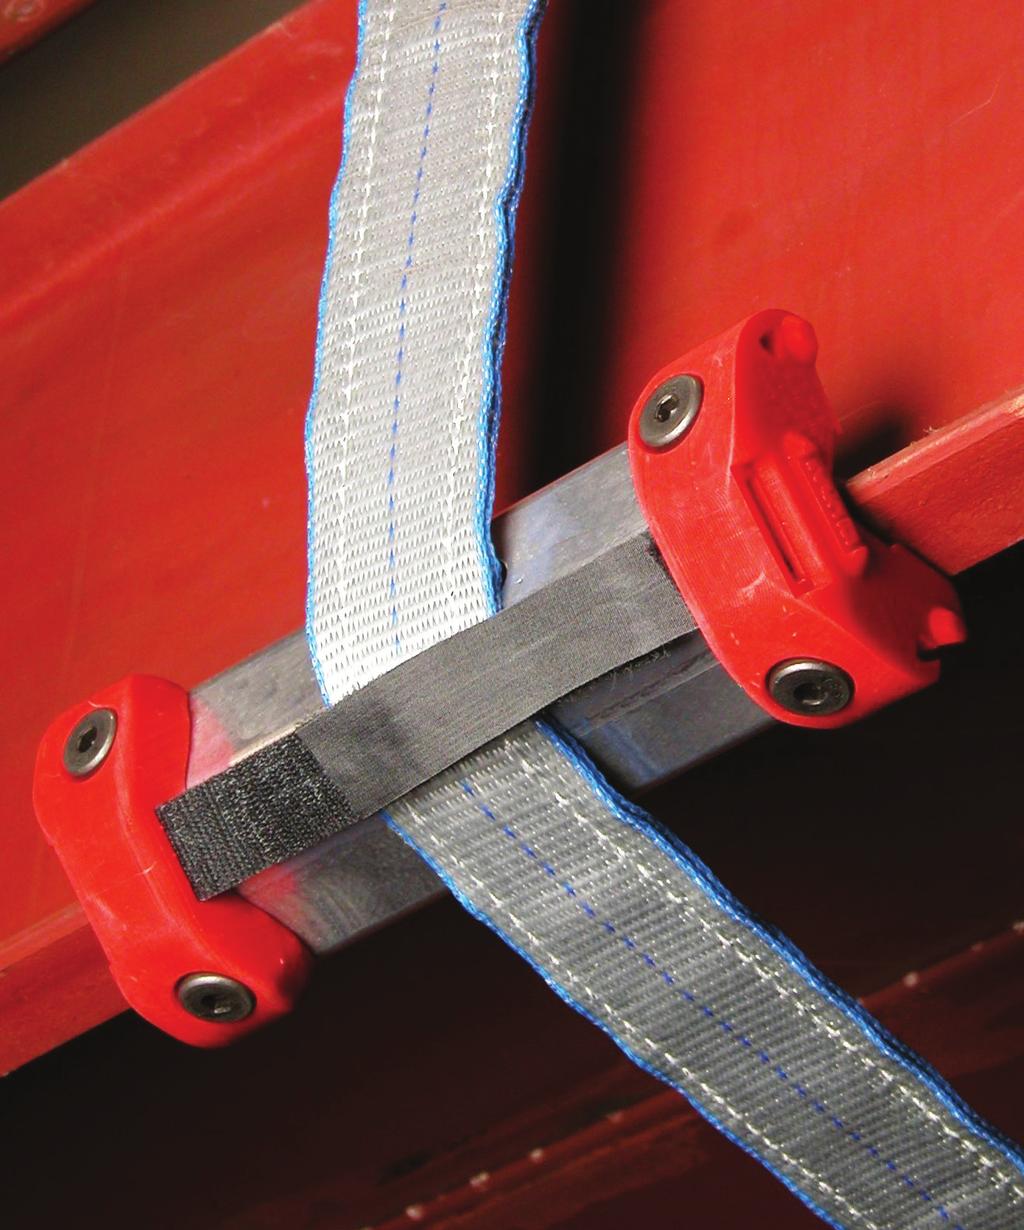 Velcro strips hold sling in place and a magnetic surface retains position on the steel load. Shields are well suited for loads having a straight contact edge, such as I-Beams.